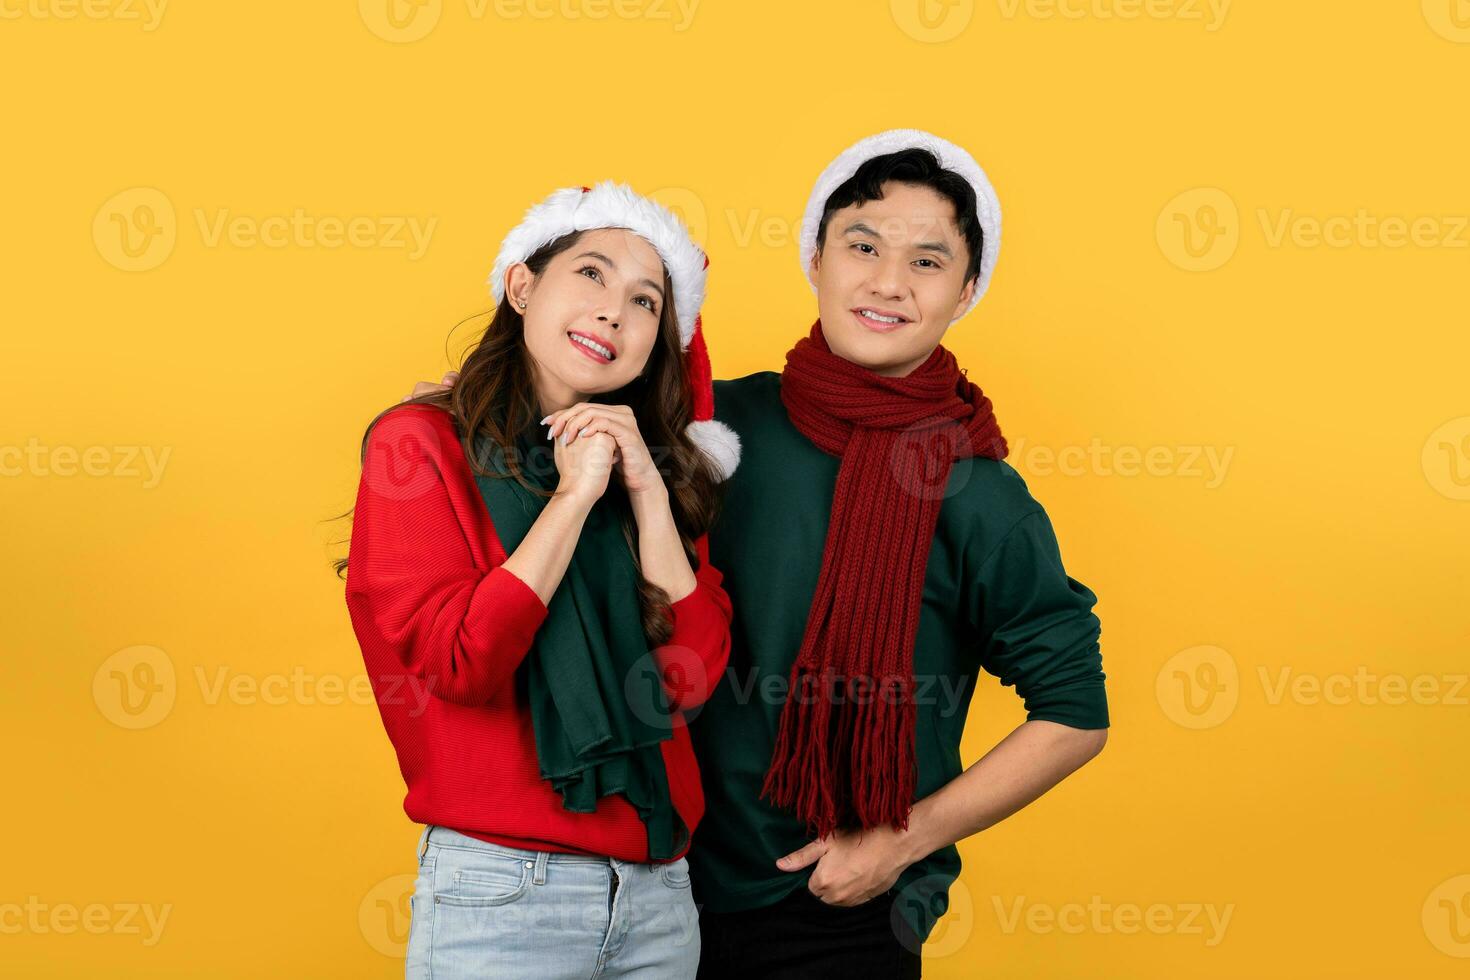 Asian couple wearing Christmas sweaters and hats in yellow background studio photo